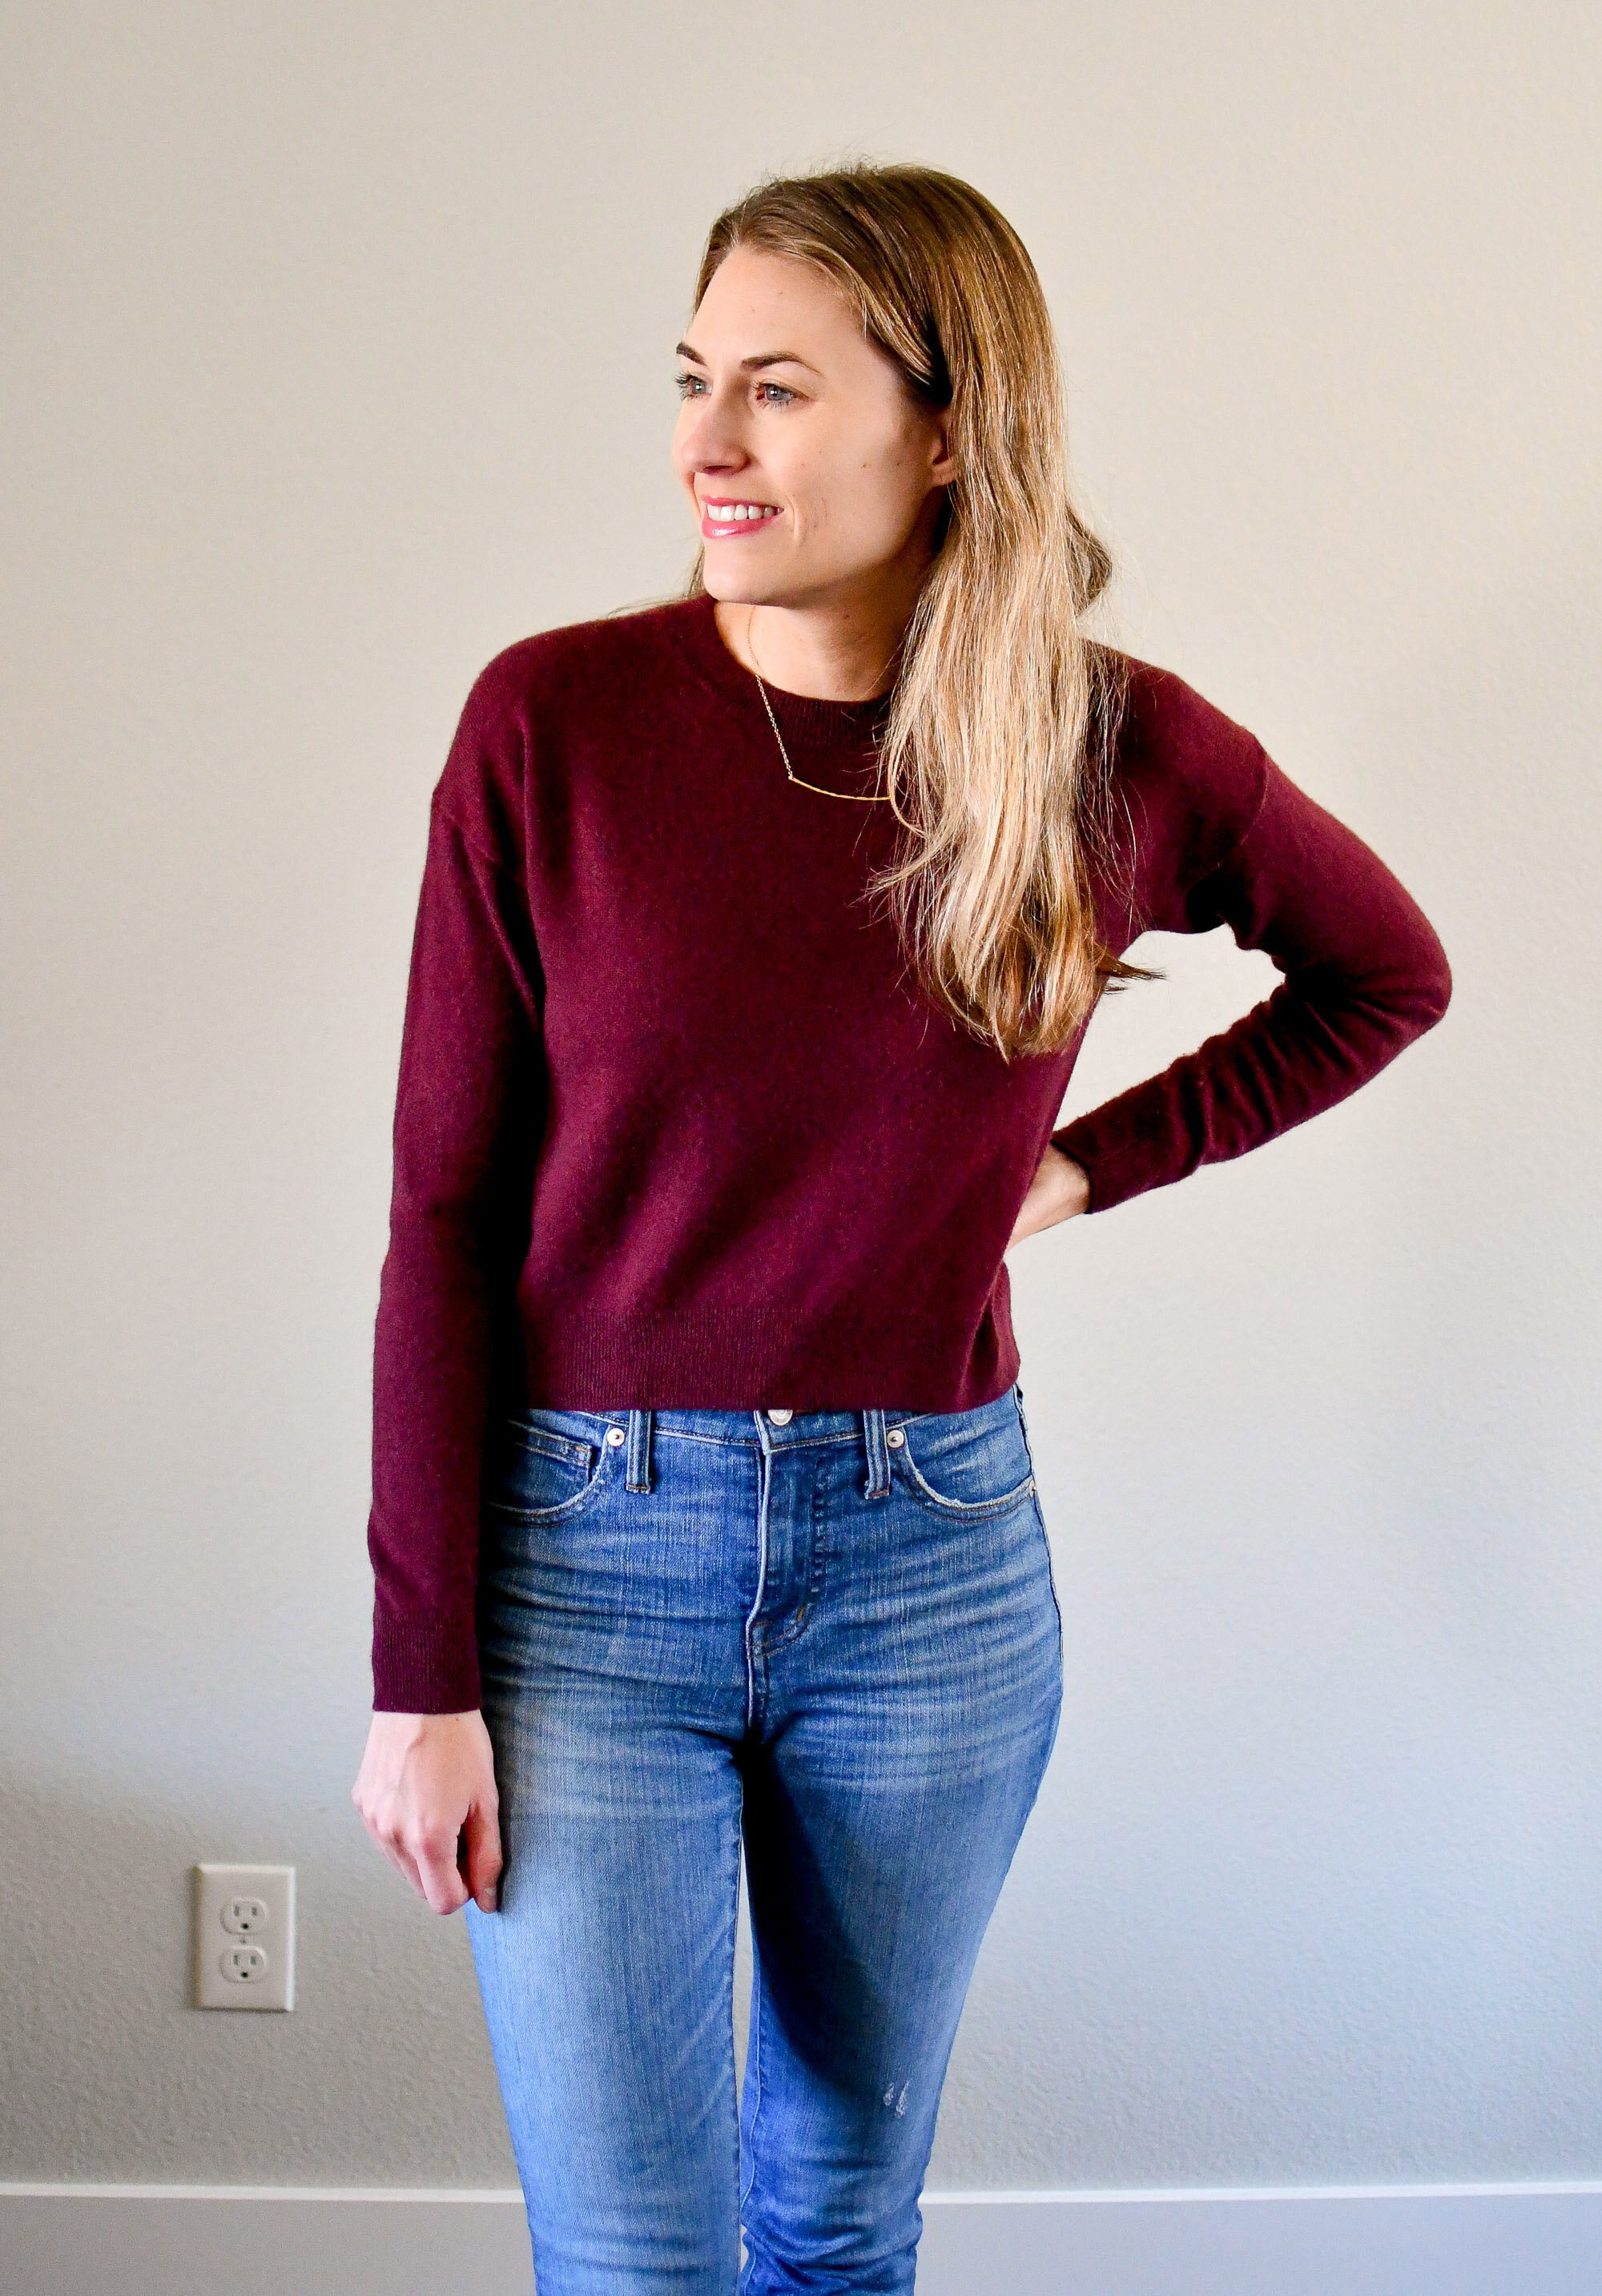 Gorjana 'Taner' bar necklace outfit with burgundy cropped sweater — Cotton Cashmere Cat Hair